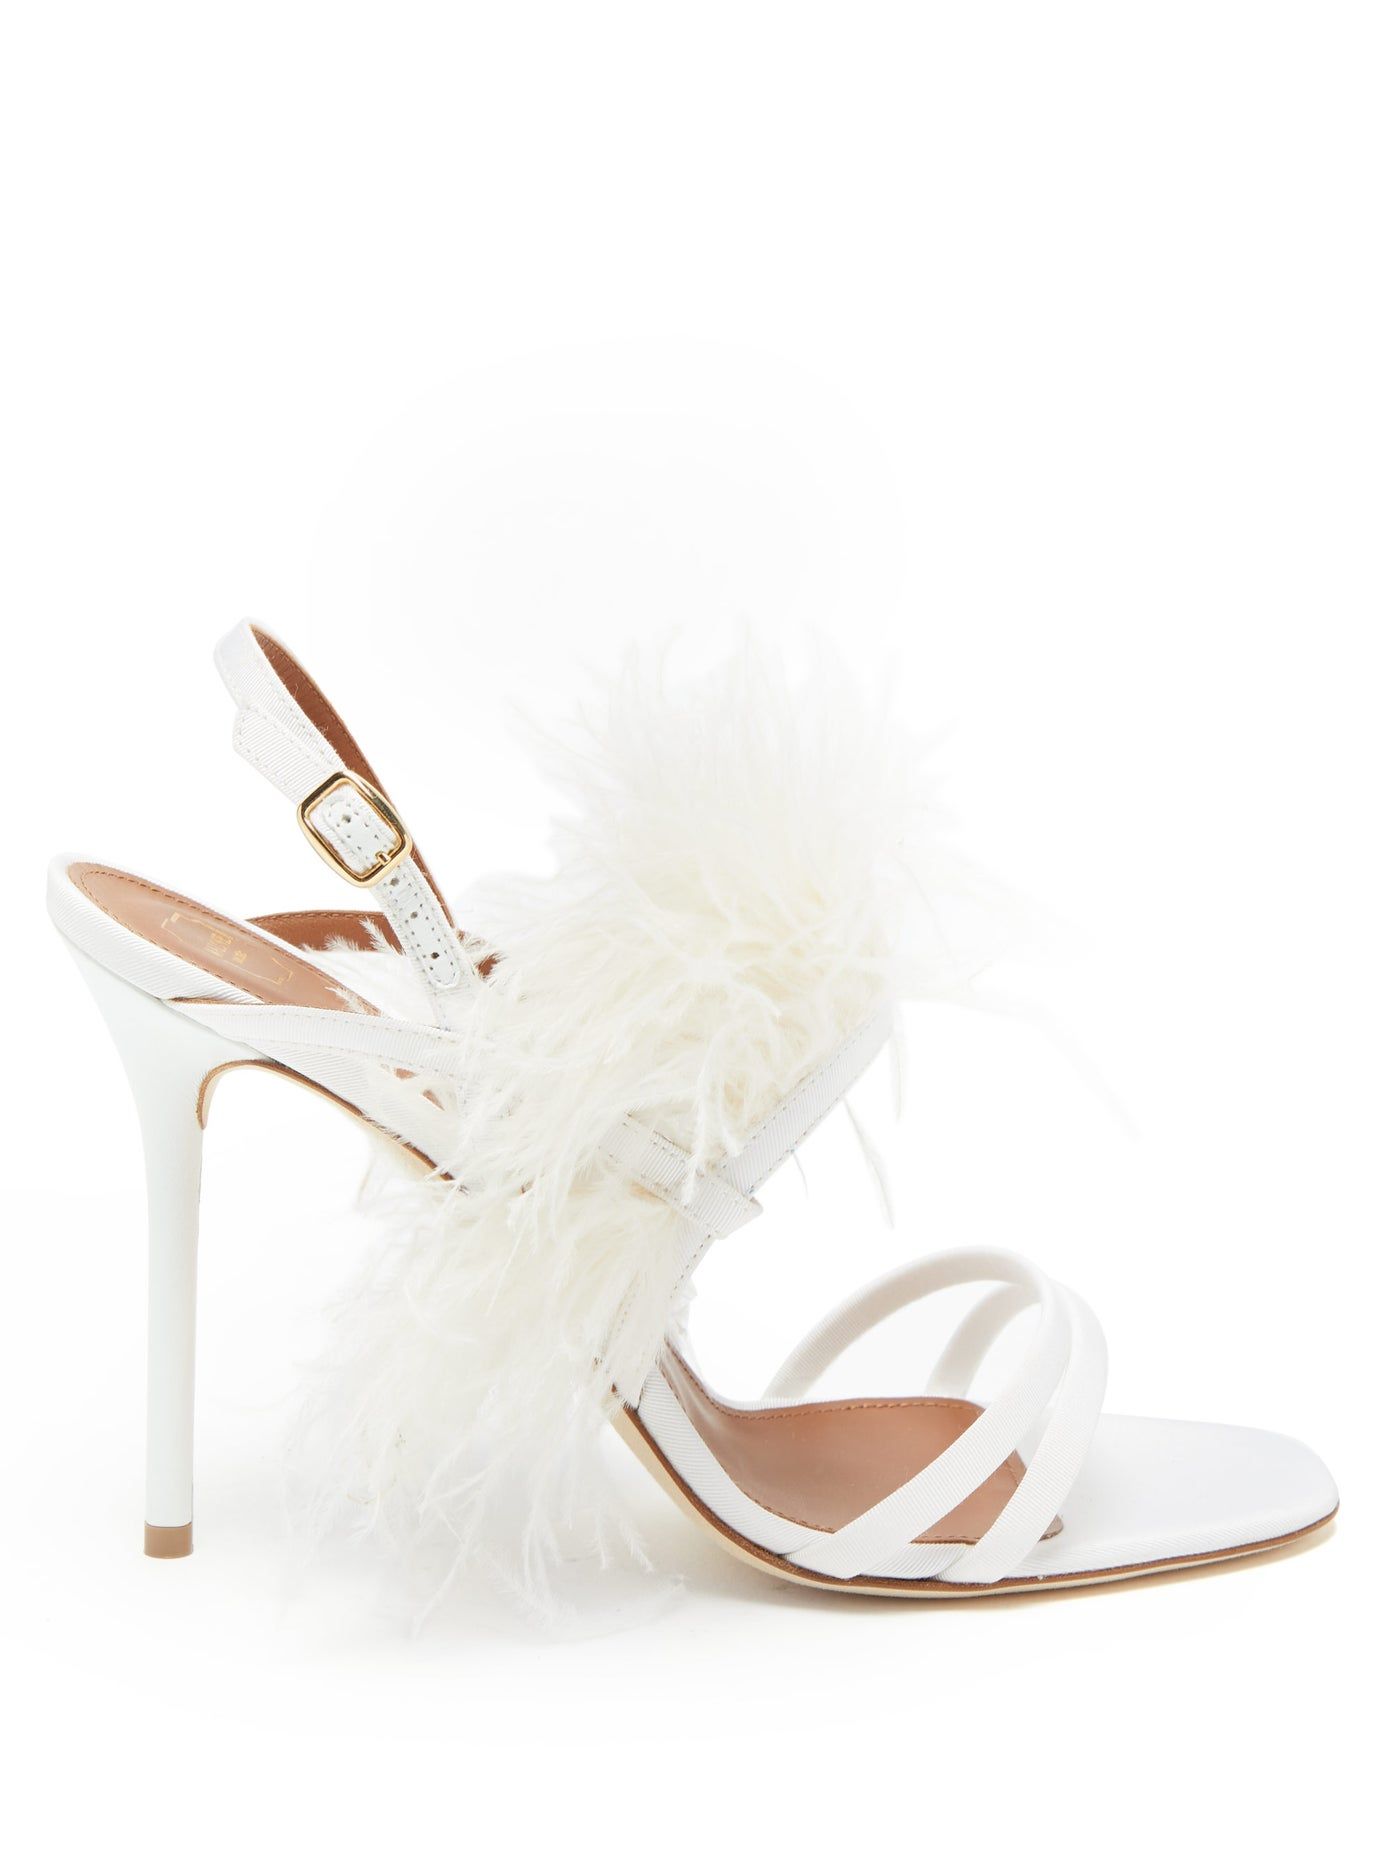 best bridal shoes for outdoor wedding